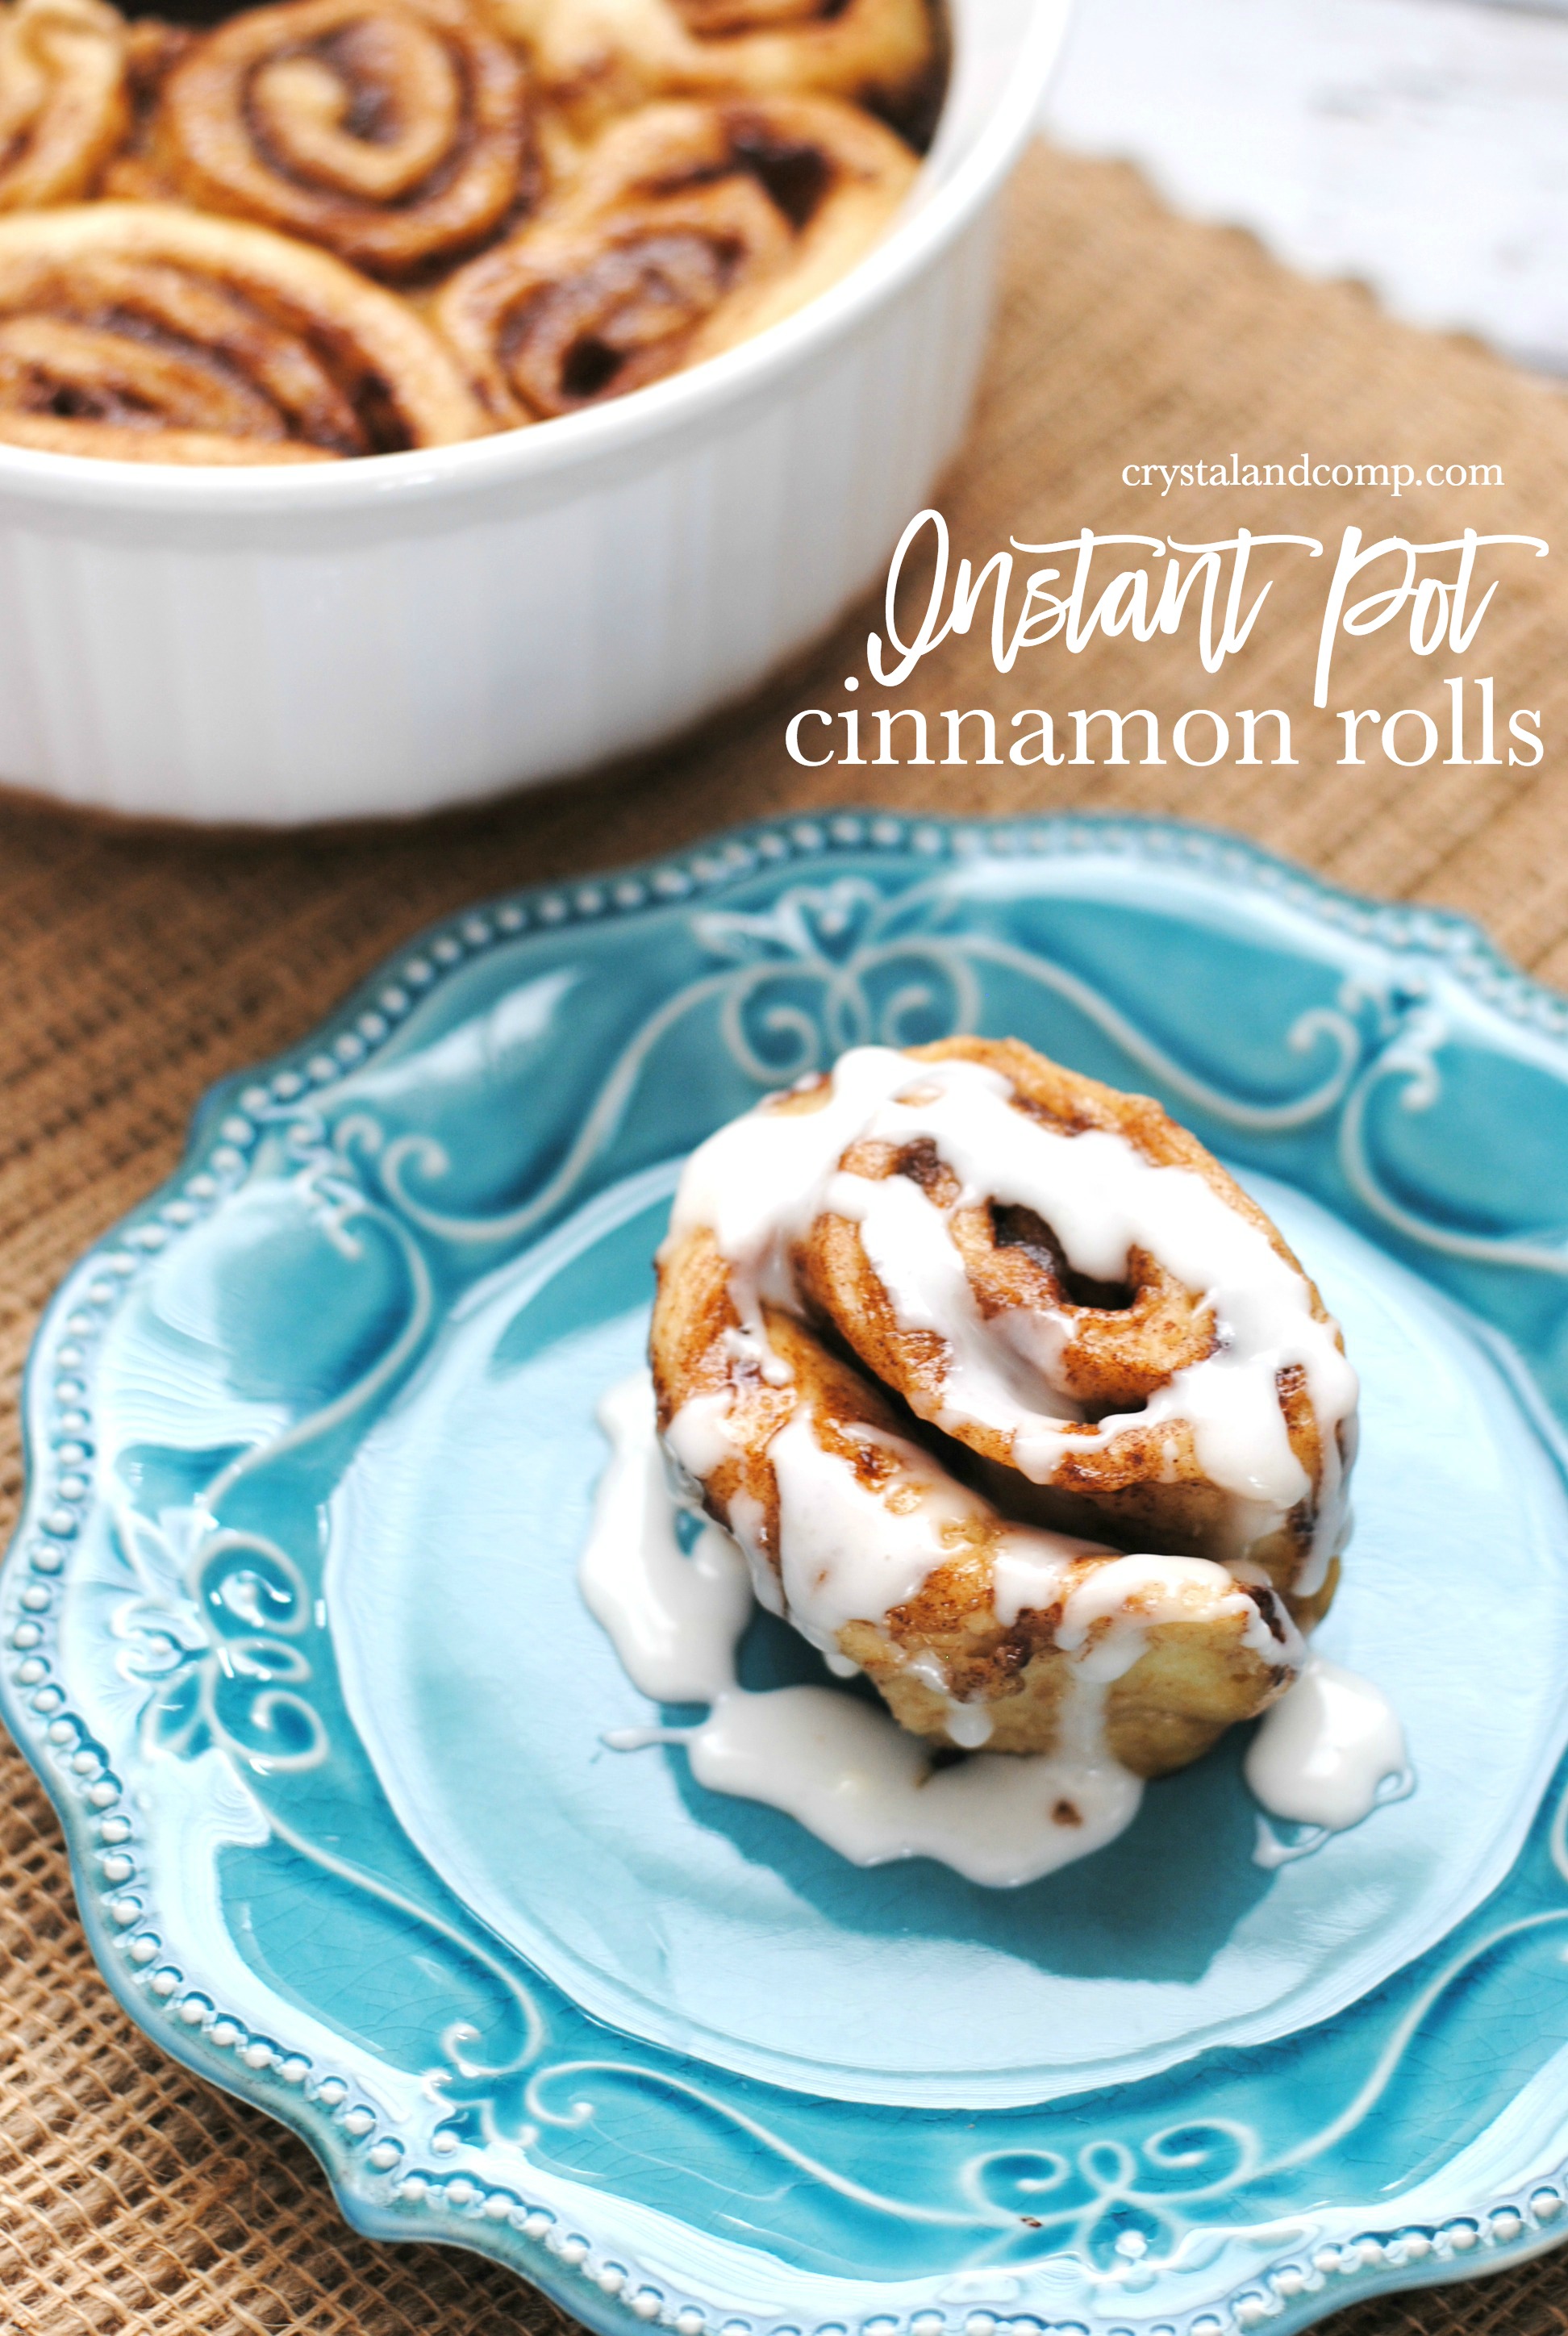 How to Make Cinnamon Rolls Using an Instant Pot